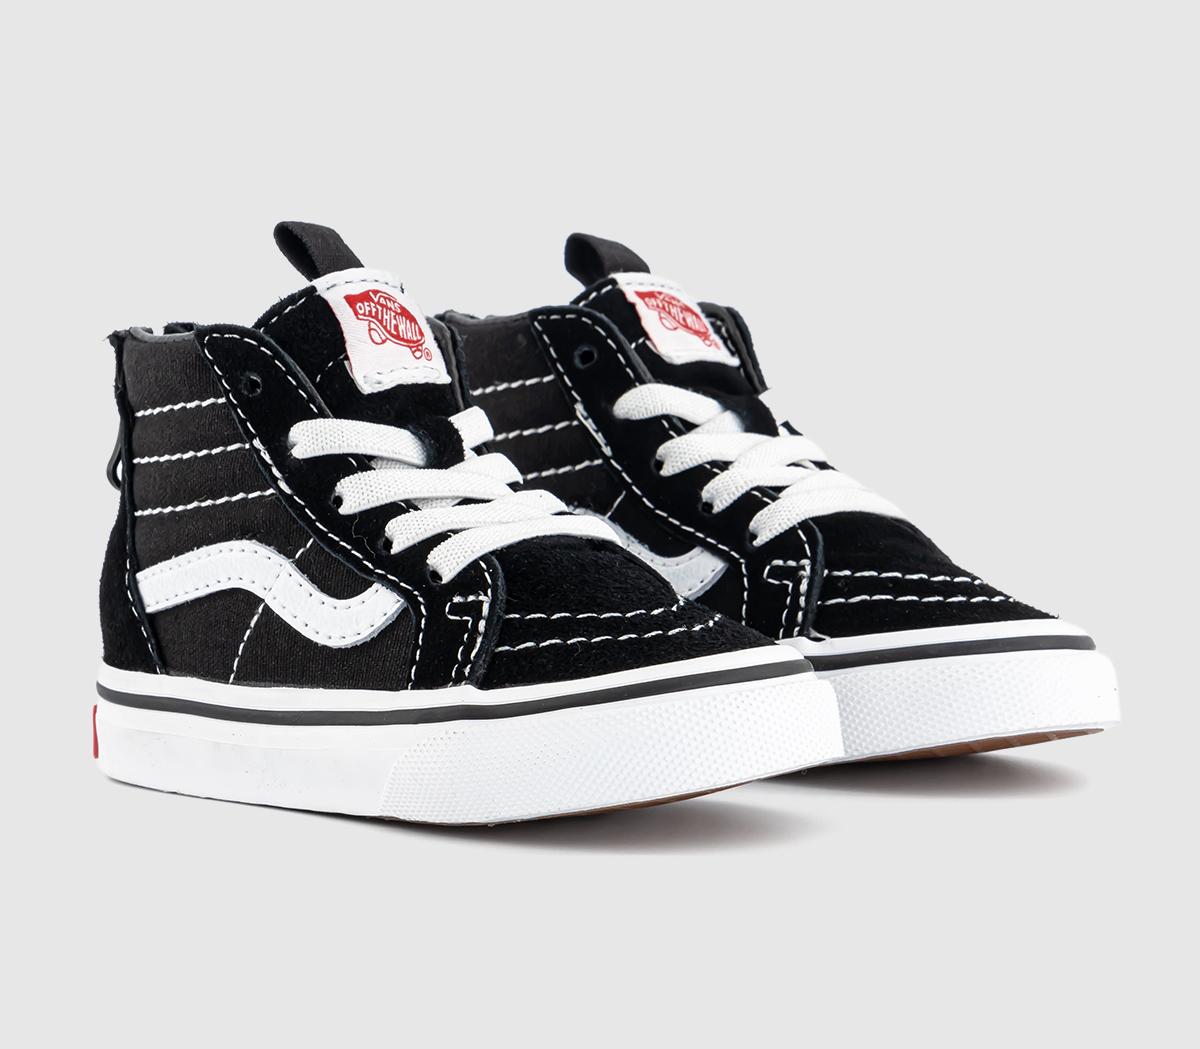 Vans Kids Sk8 Toddlers Black And White Canvas Hi Zip Trainers, Size: 3, 3 Infant